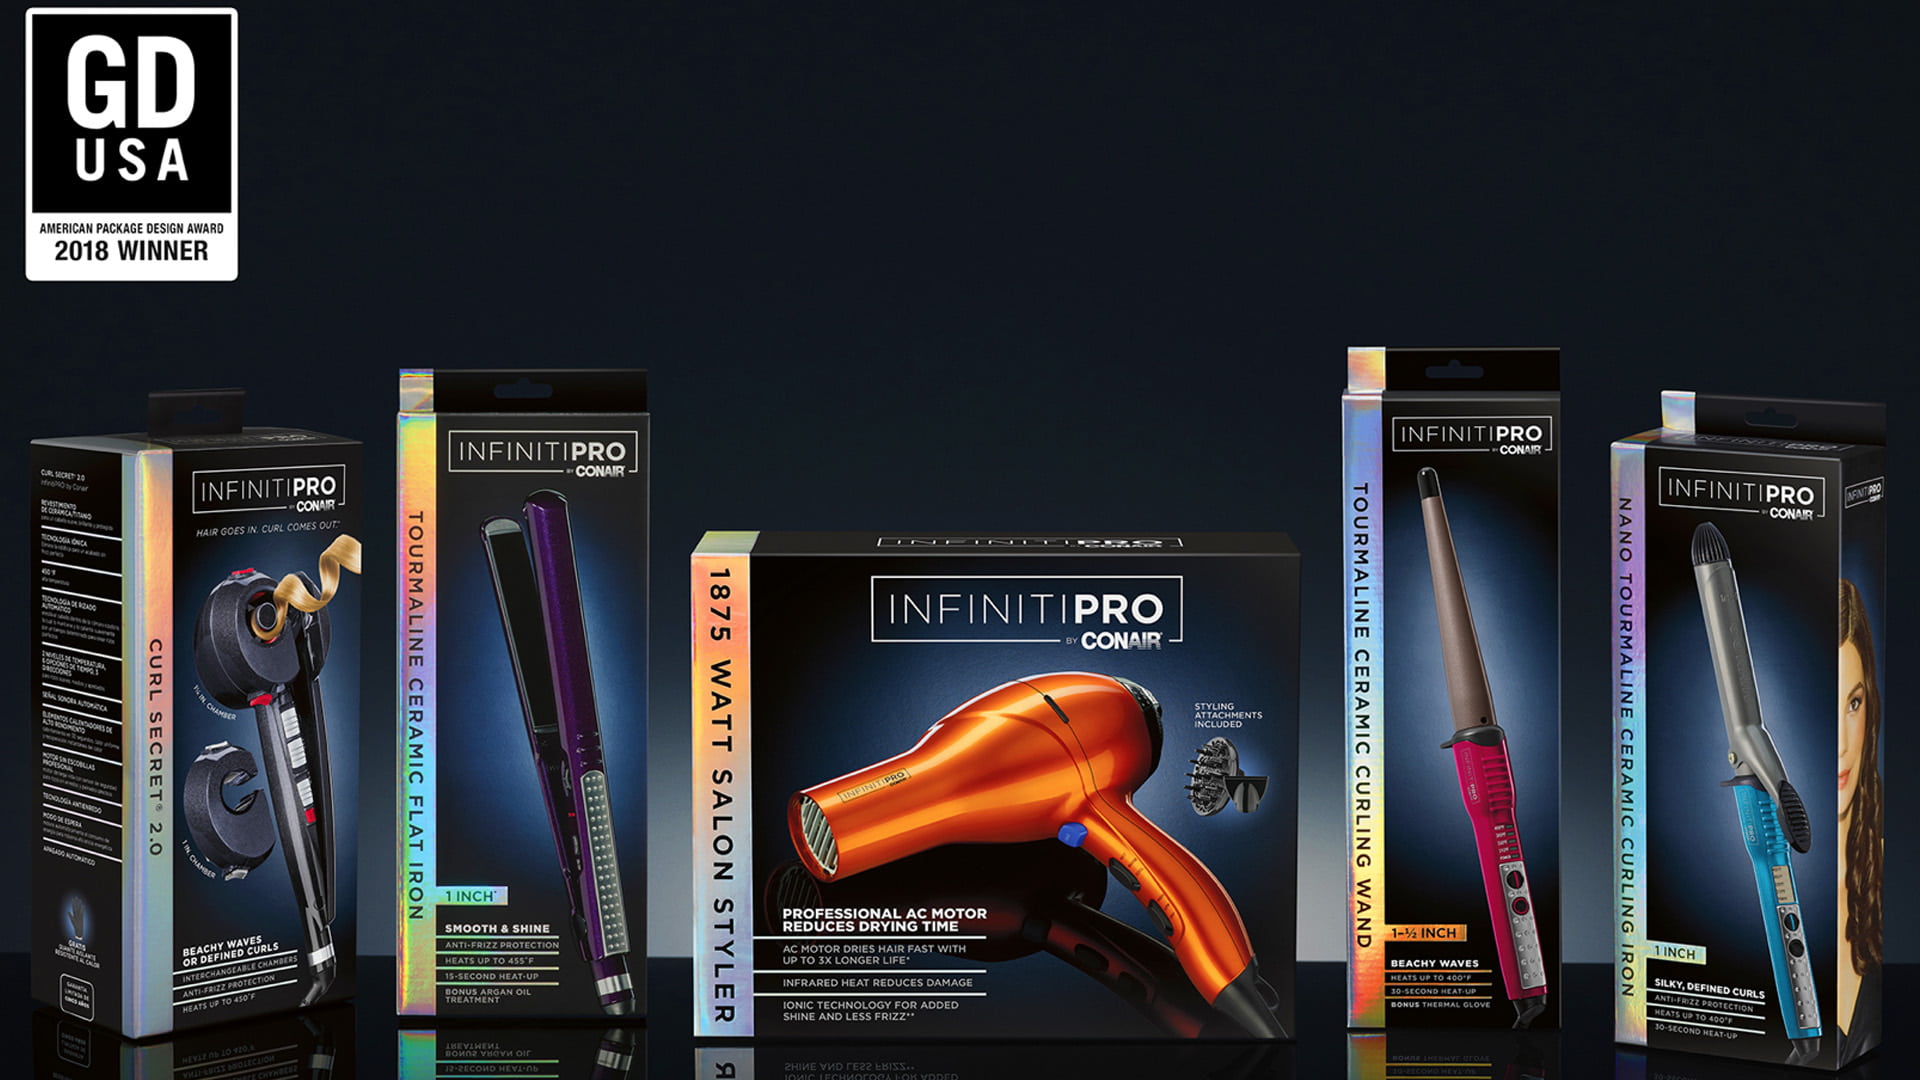 A photo of the 2018 winner of the American Package Design competition, a package for CONAIR's Infiniti Pro hair tools.